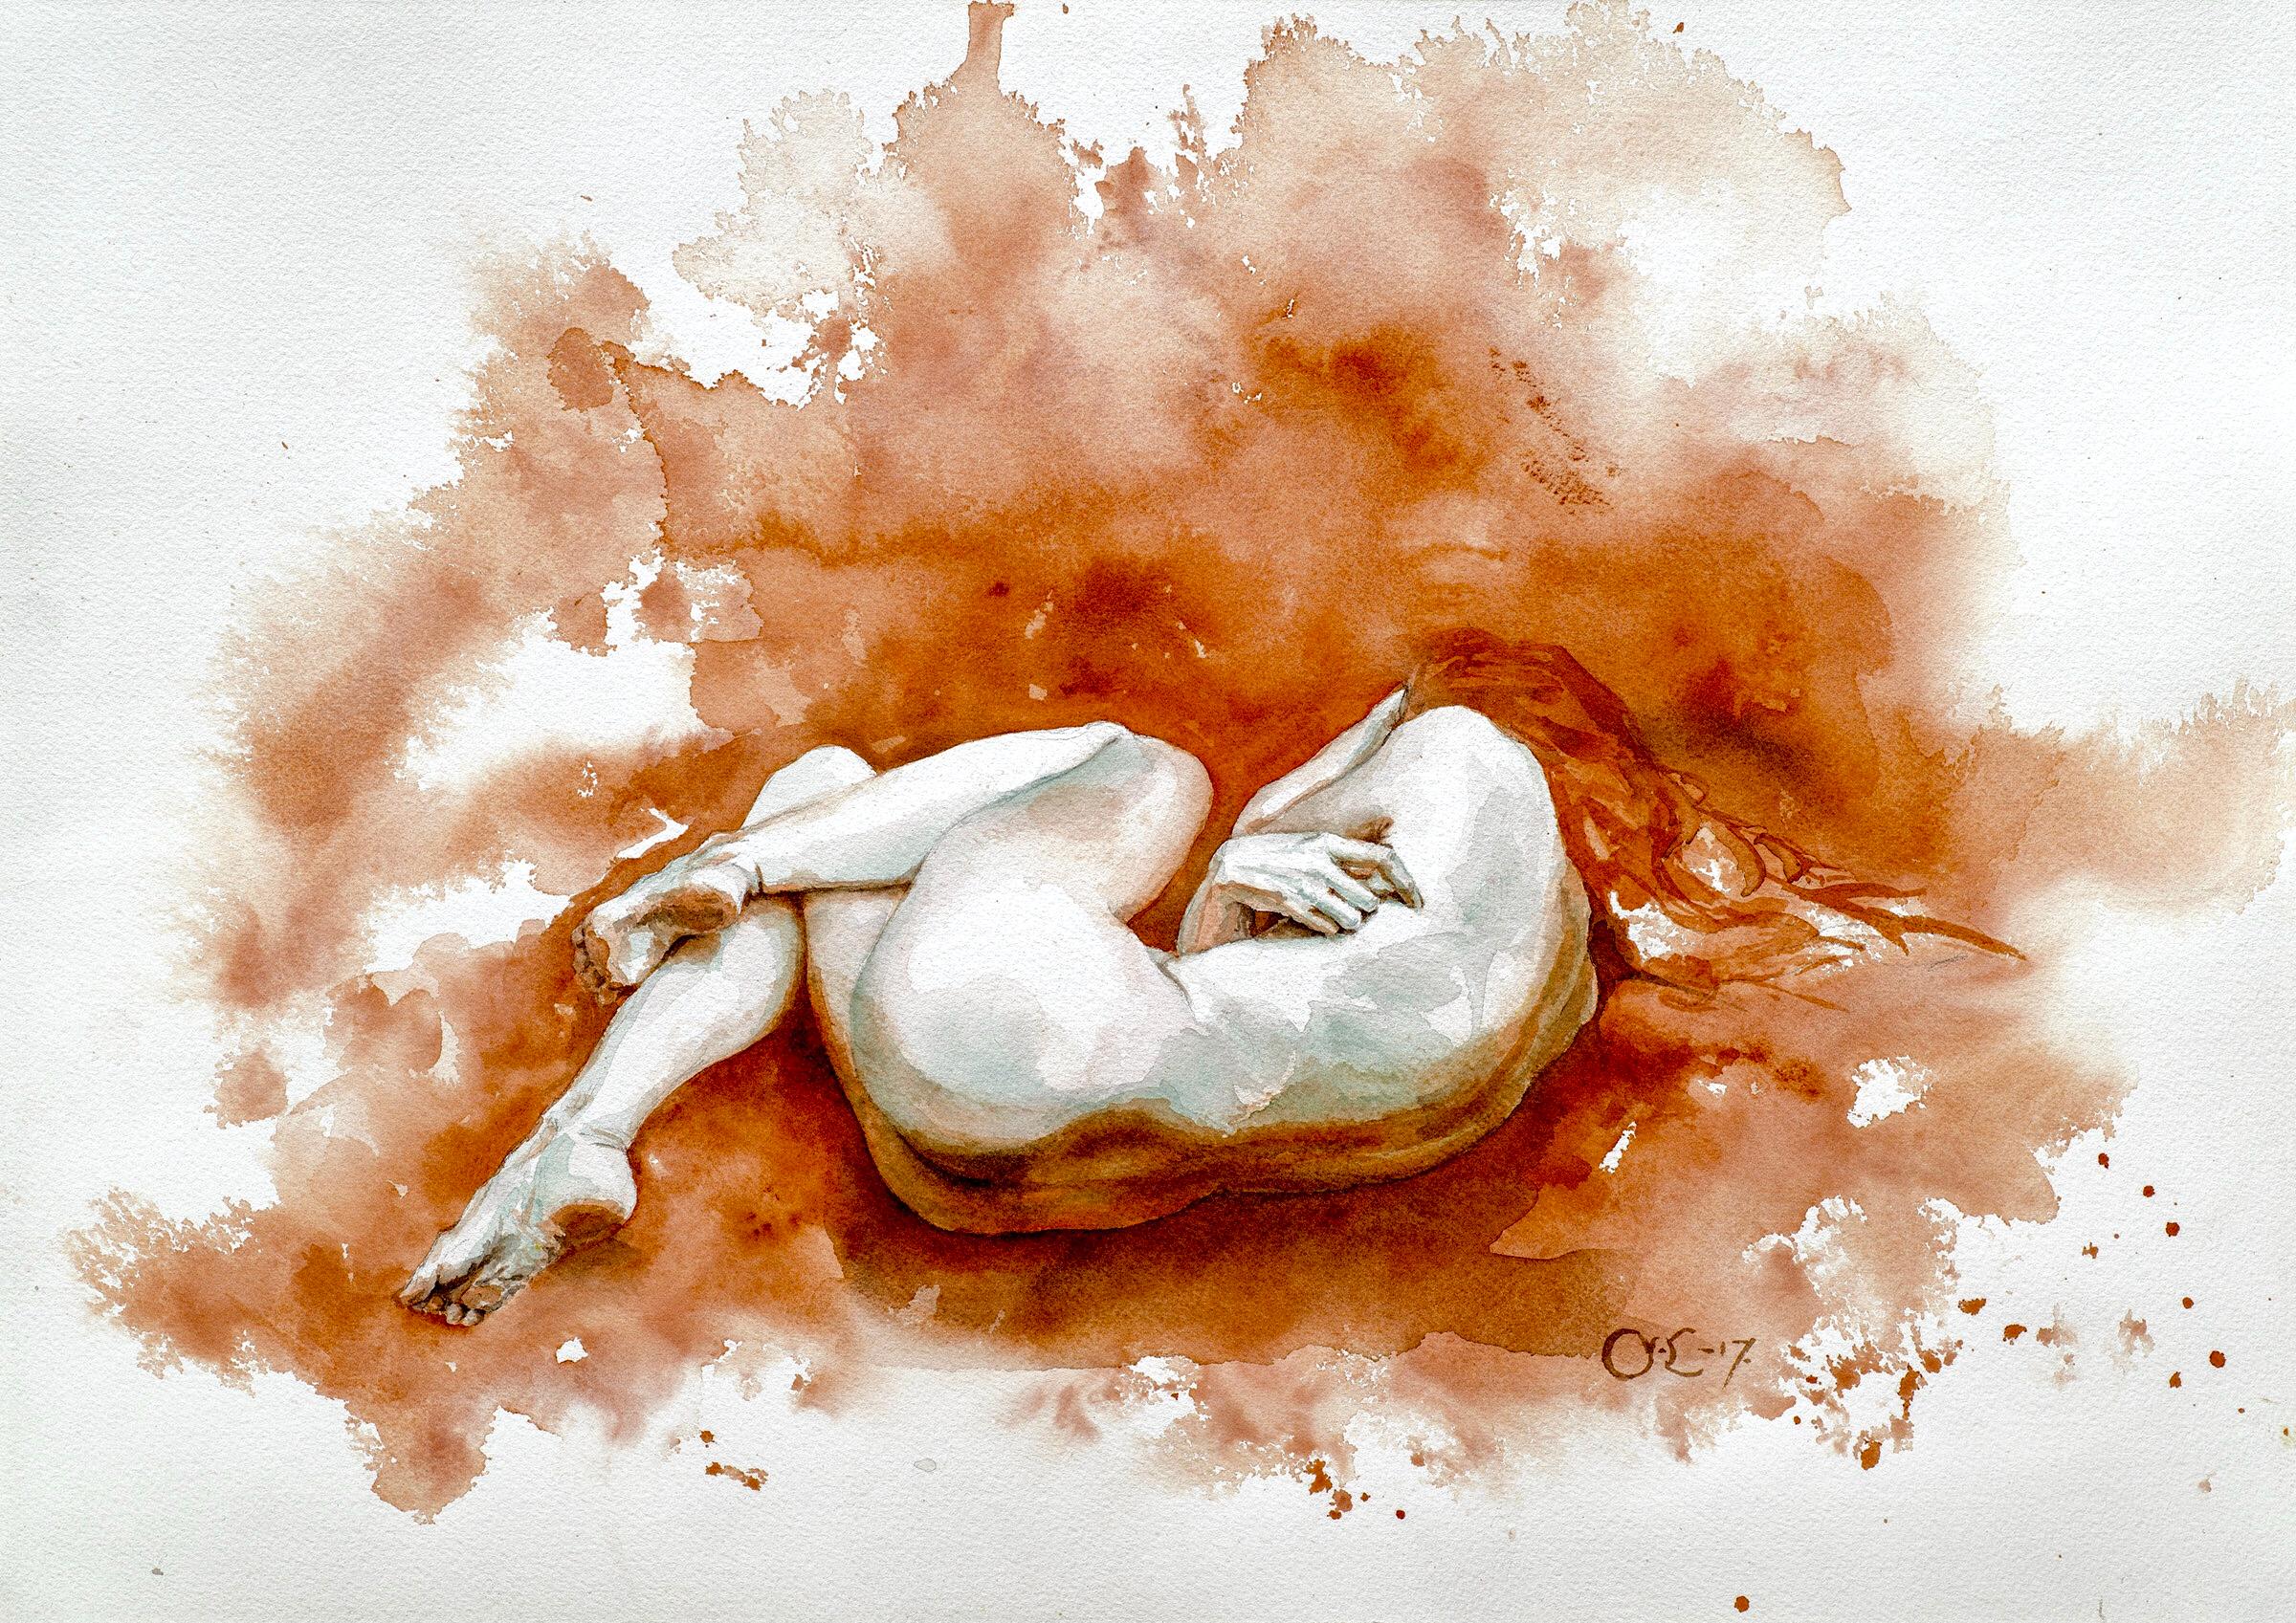 Orielle Caldwell Nude Painting - 'Rêverie' Watercolor Painting By Orielle - Female Nudes Art